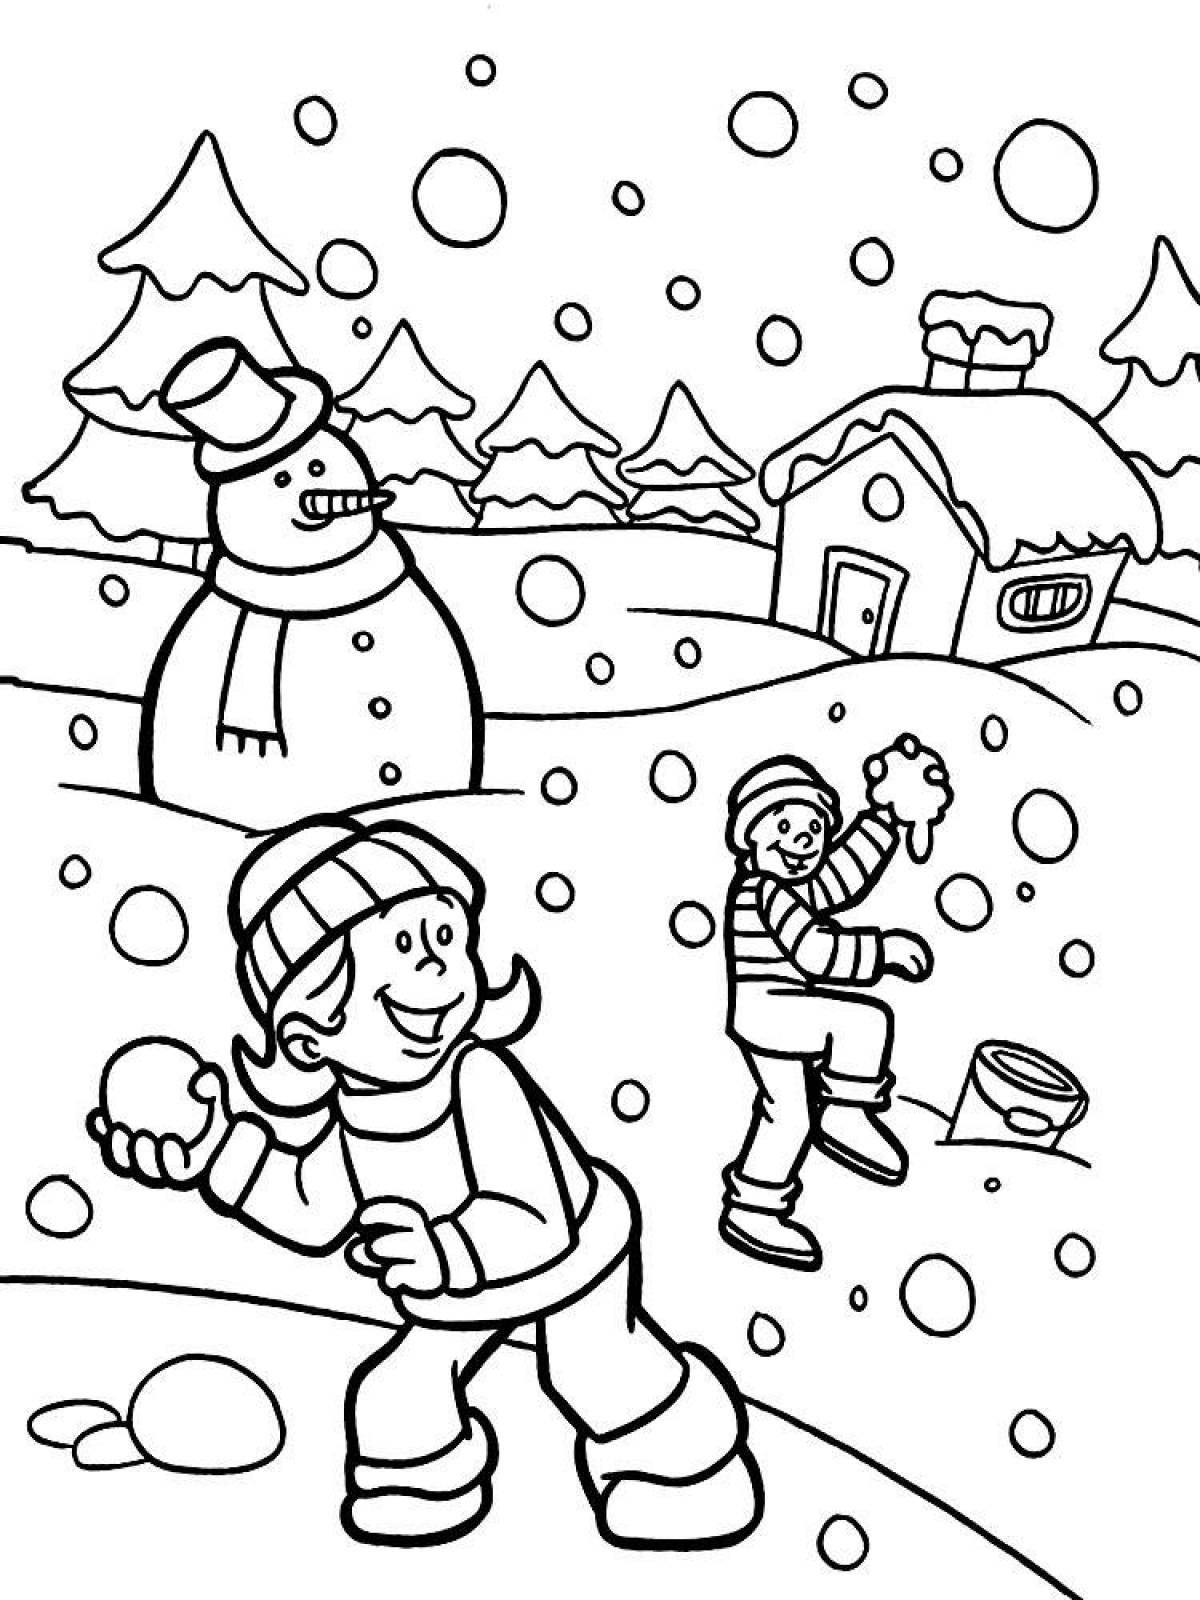 Great winter coloring book for 4-5 year olds